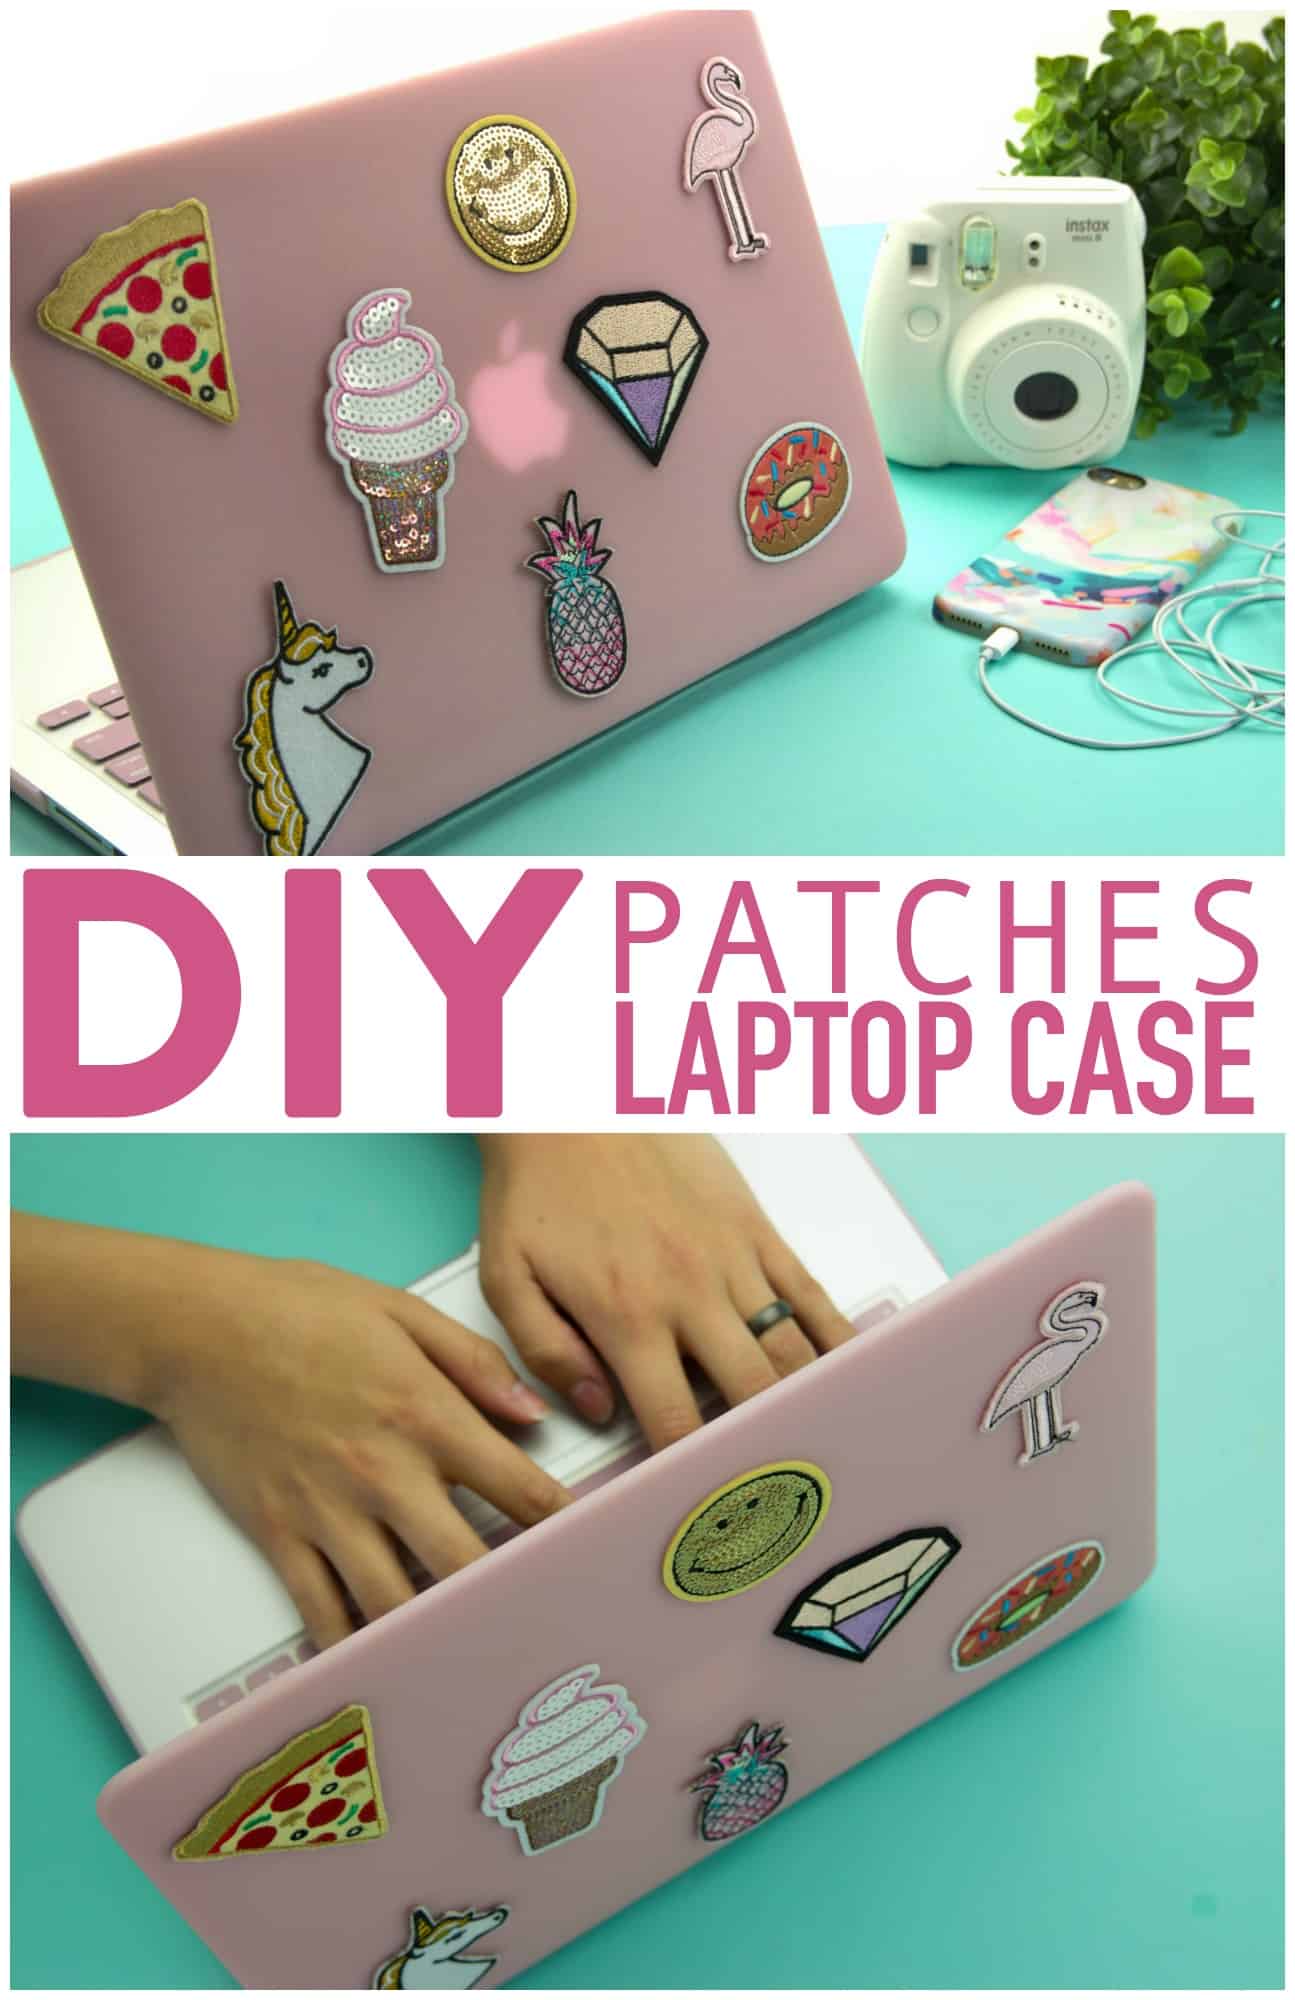 directorio animación fuerte From Cool Skins to Glitzy Makeover: Awesome Ways to Decorate Your Laptop